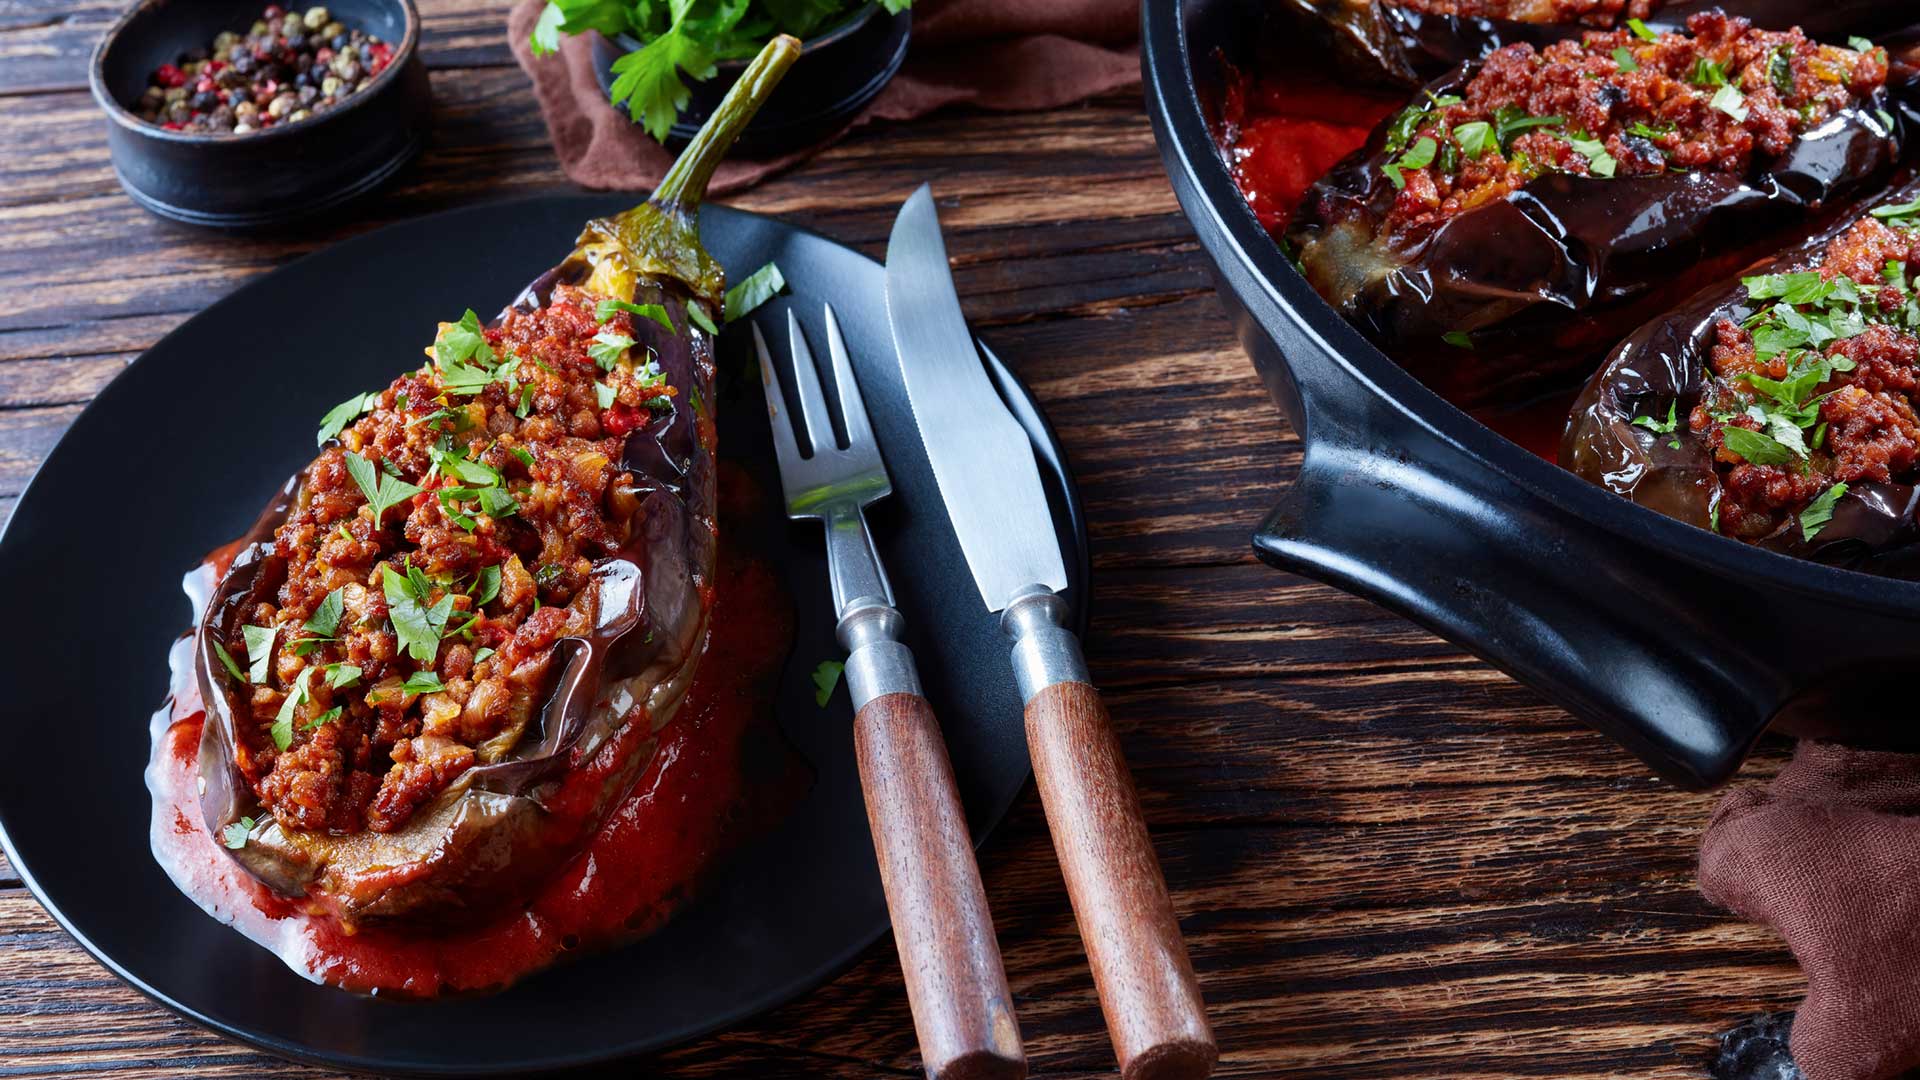 Karniyarik - Stuffed Eggplants, Aubergines with ground beef and vegetables baked with tomato sauce served on a plate with fork and knife, turkish cuisine, horizontal view from above, close-up, flatlay